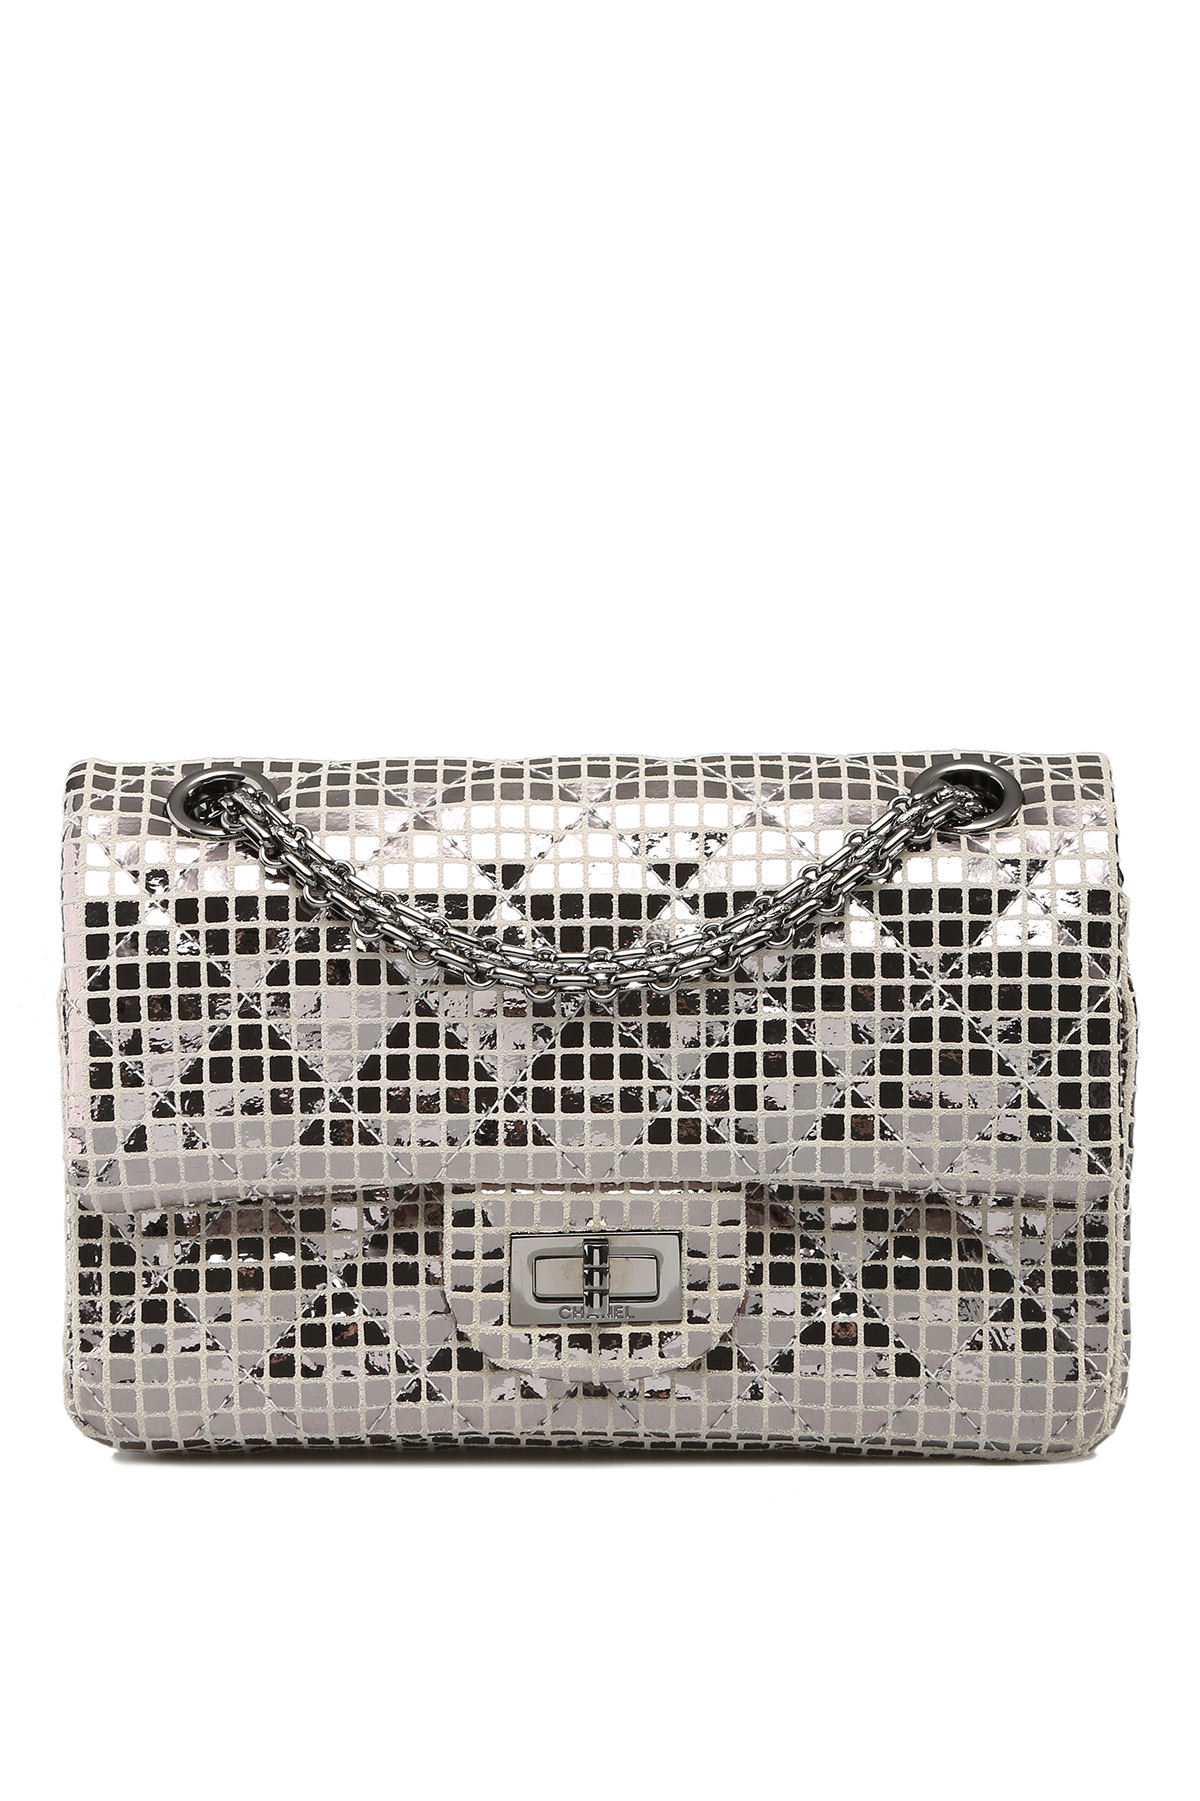 Chanel Quilted Reissue 2.55 Bag in Silver Metallic Mirror Leather & Suede  with Ruthenium Hardware